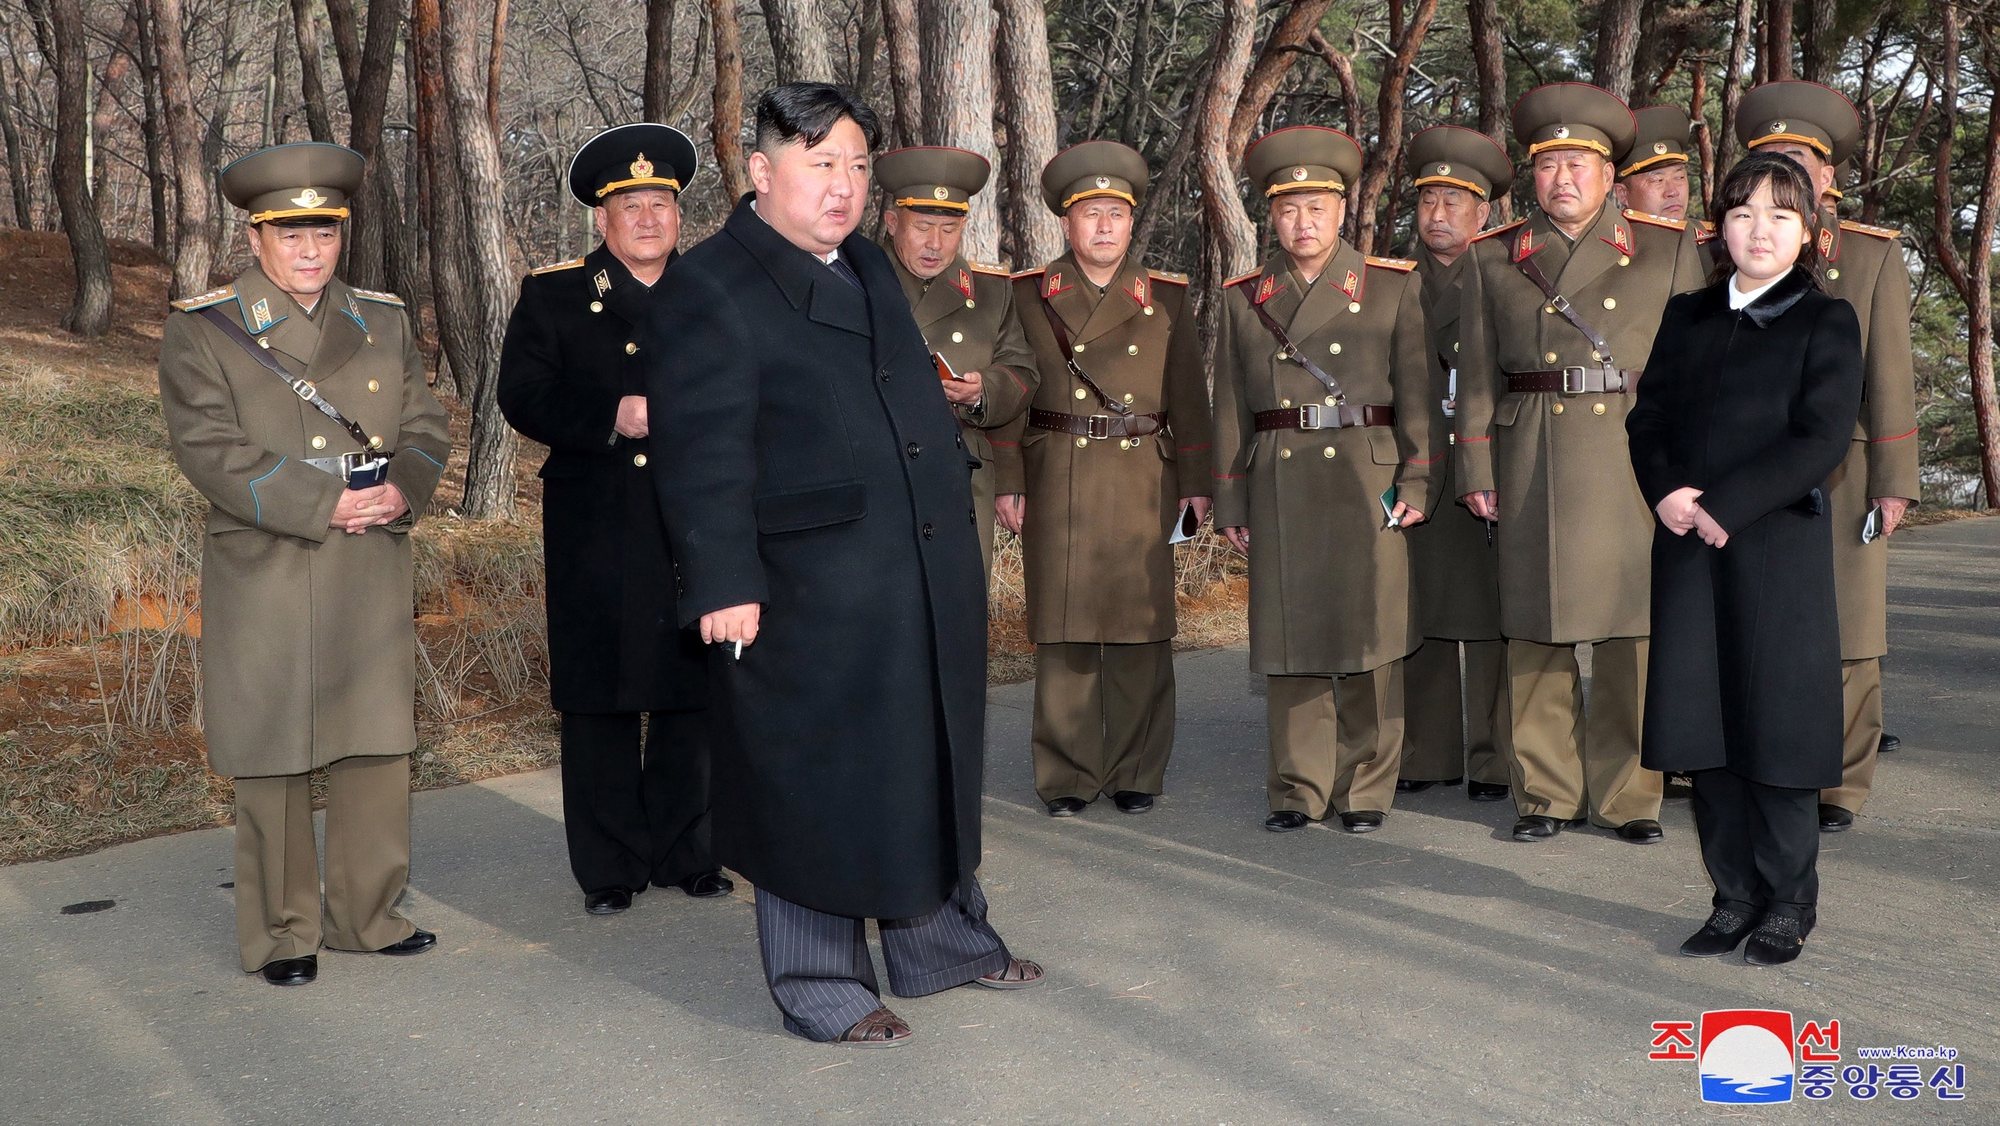 epa10512828 A photo released by the official North Korean Central News Agency (KCNA) shows Supreme Leader Kim Jong Un (3-L) and his daughter Kim Ju-ae (R) at an artillery drill in an undisclosed location in North Korea, 09 March 2023 (issued 10 March 2023). According to KCNA, Supreme Leader Kim Jong Un &#039;gave field guidance&#039; at the &#039;fire assault drill&#039; by the Hwasong artillery unit of the Korean People&#039;s Army.  EPA/KCNA   EDITORIAL USE ONLY